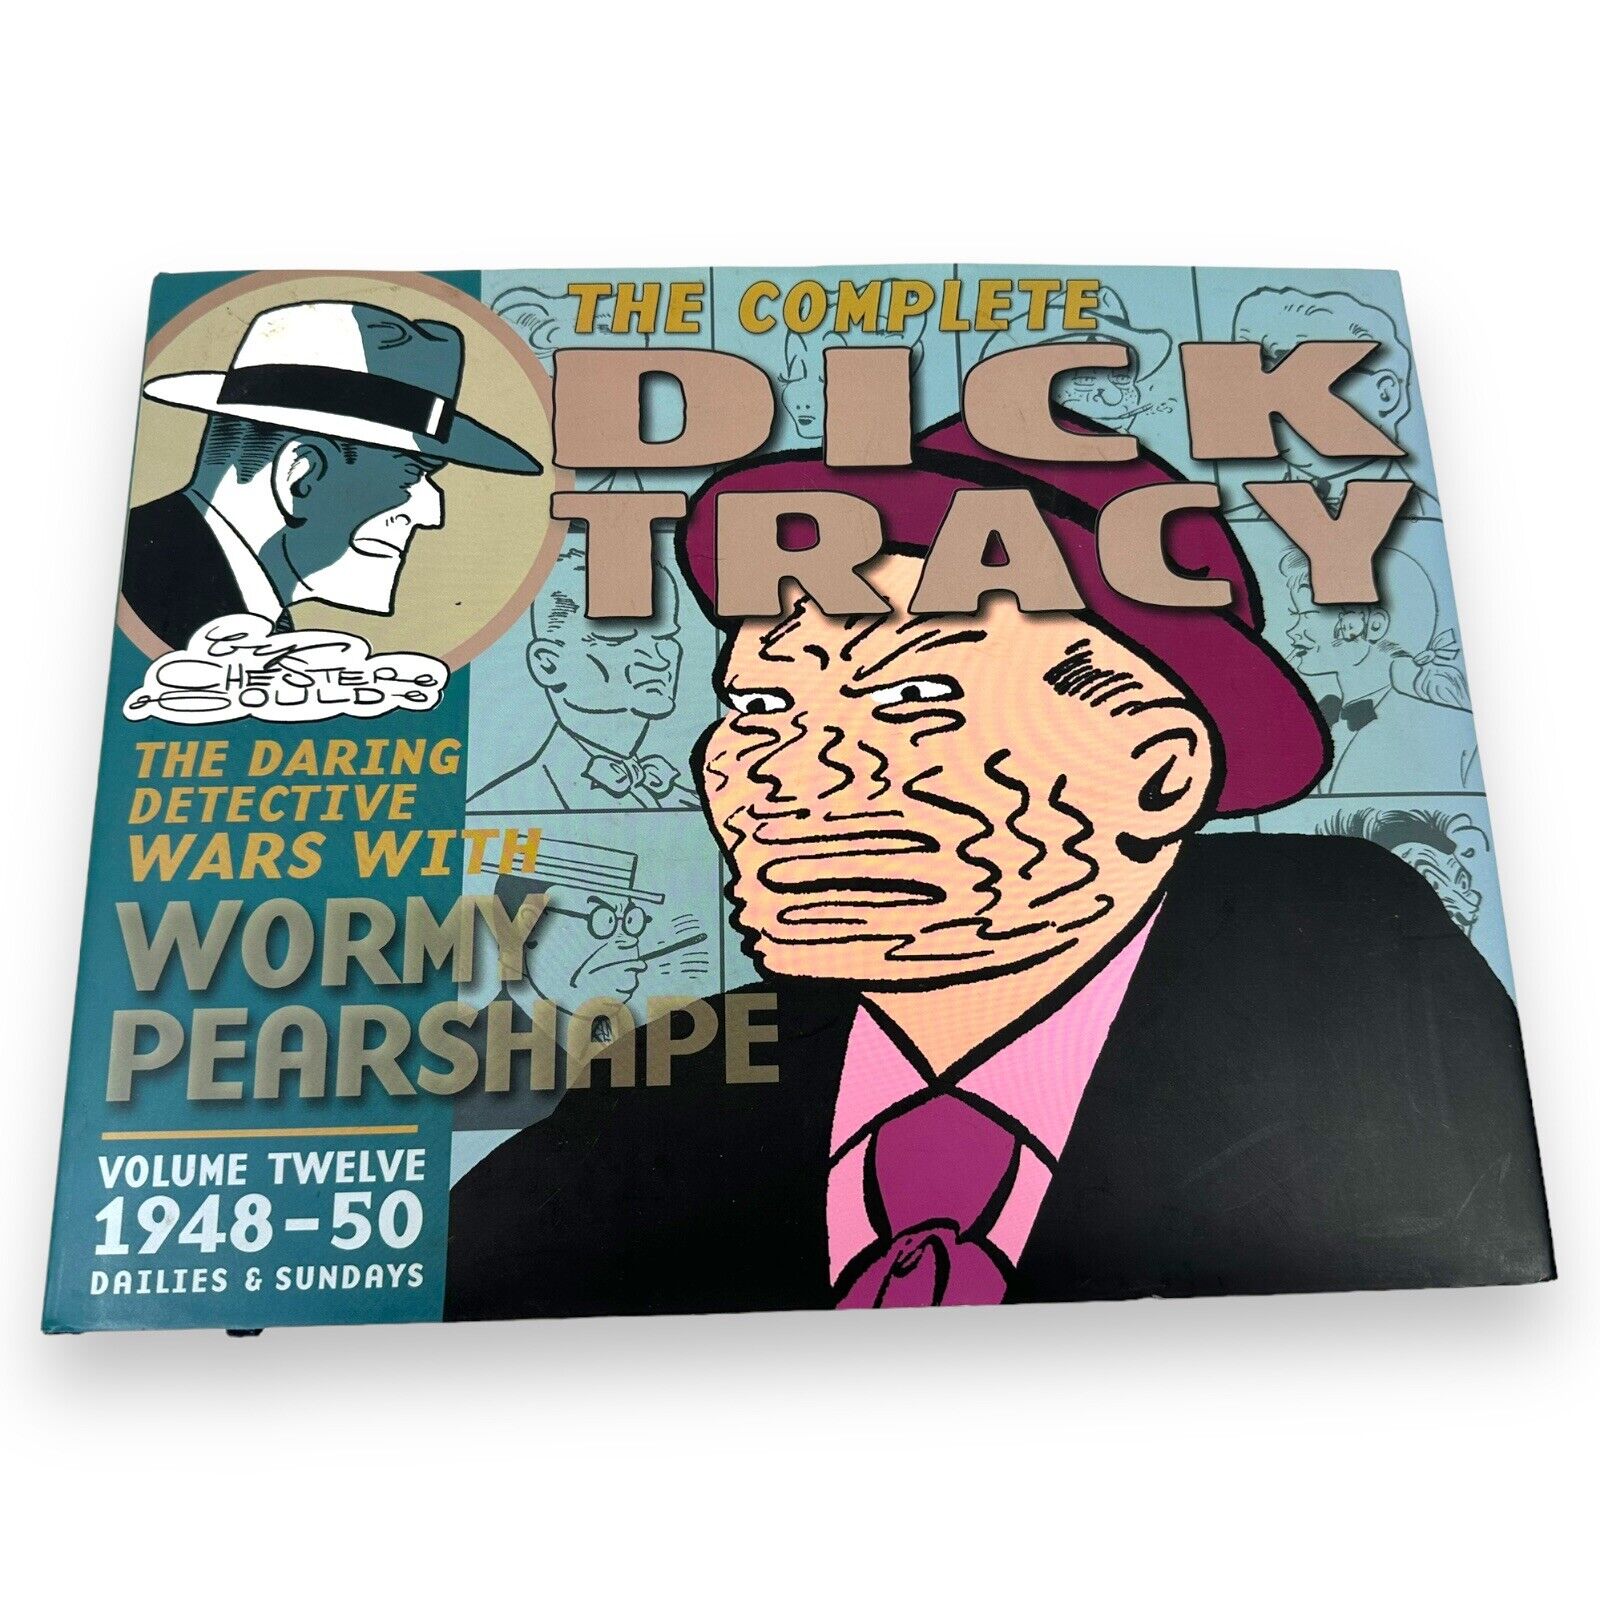 The Complete Dick Tracy: Wormy Pearshape Vol #12 1st print 2011 by Chester Gould